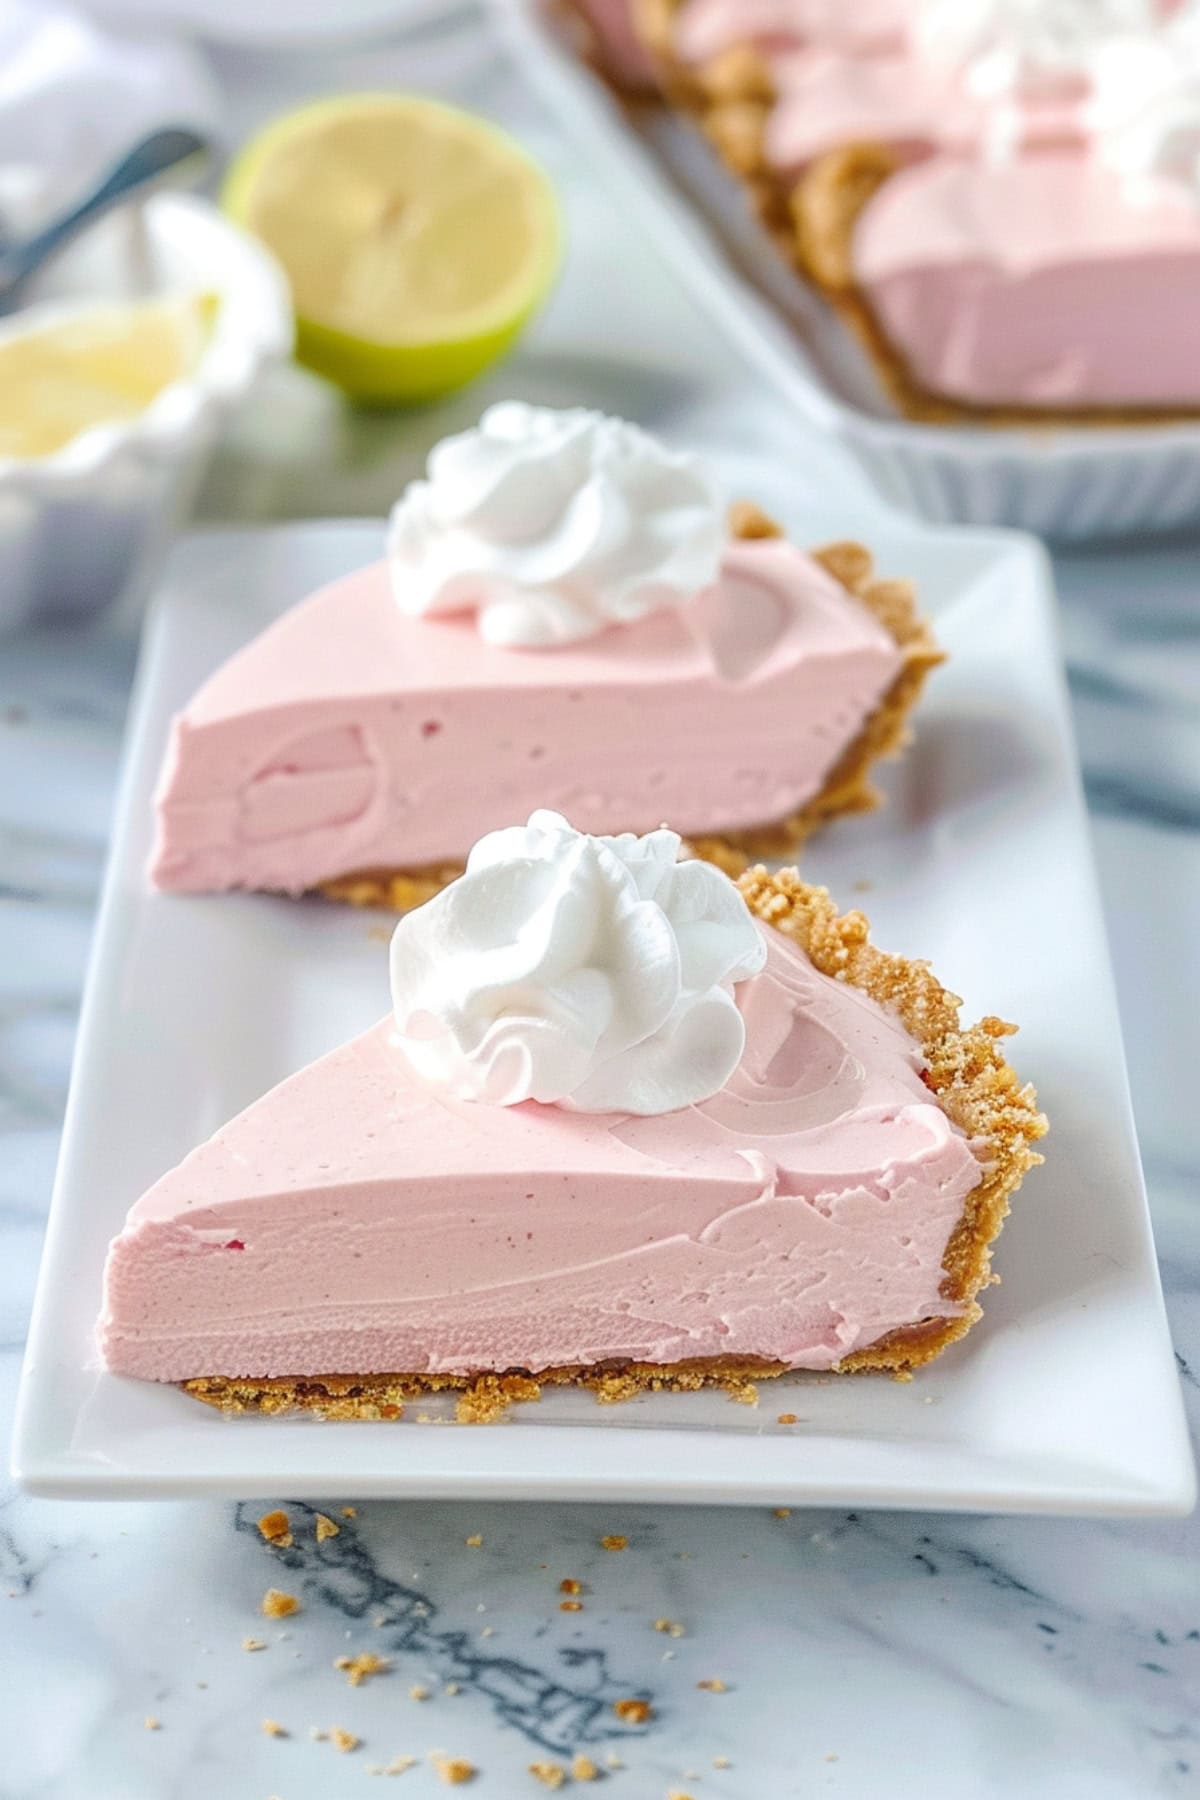 Two slices of pink lemonade pie with whipped cream on top.